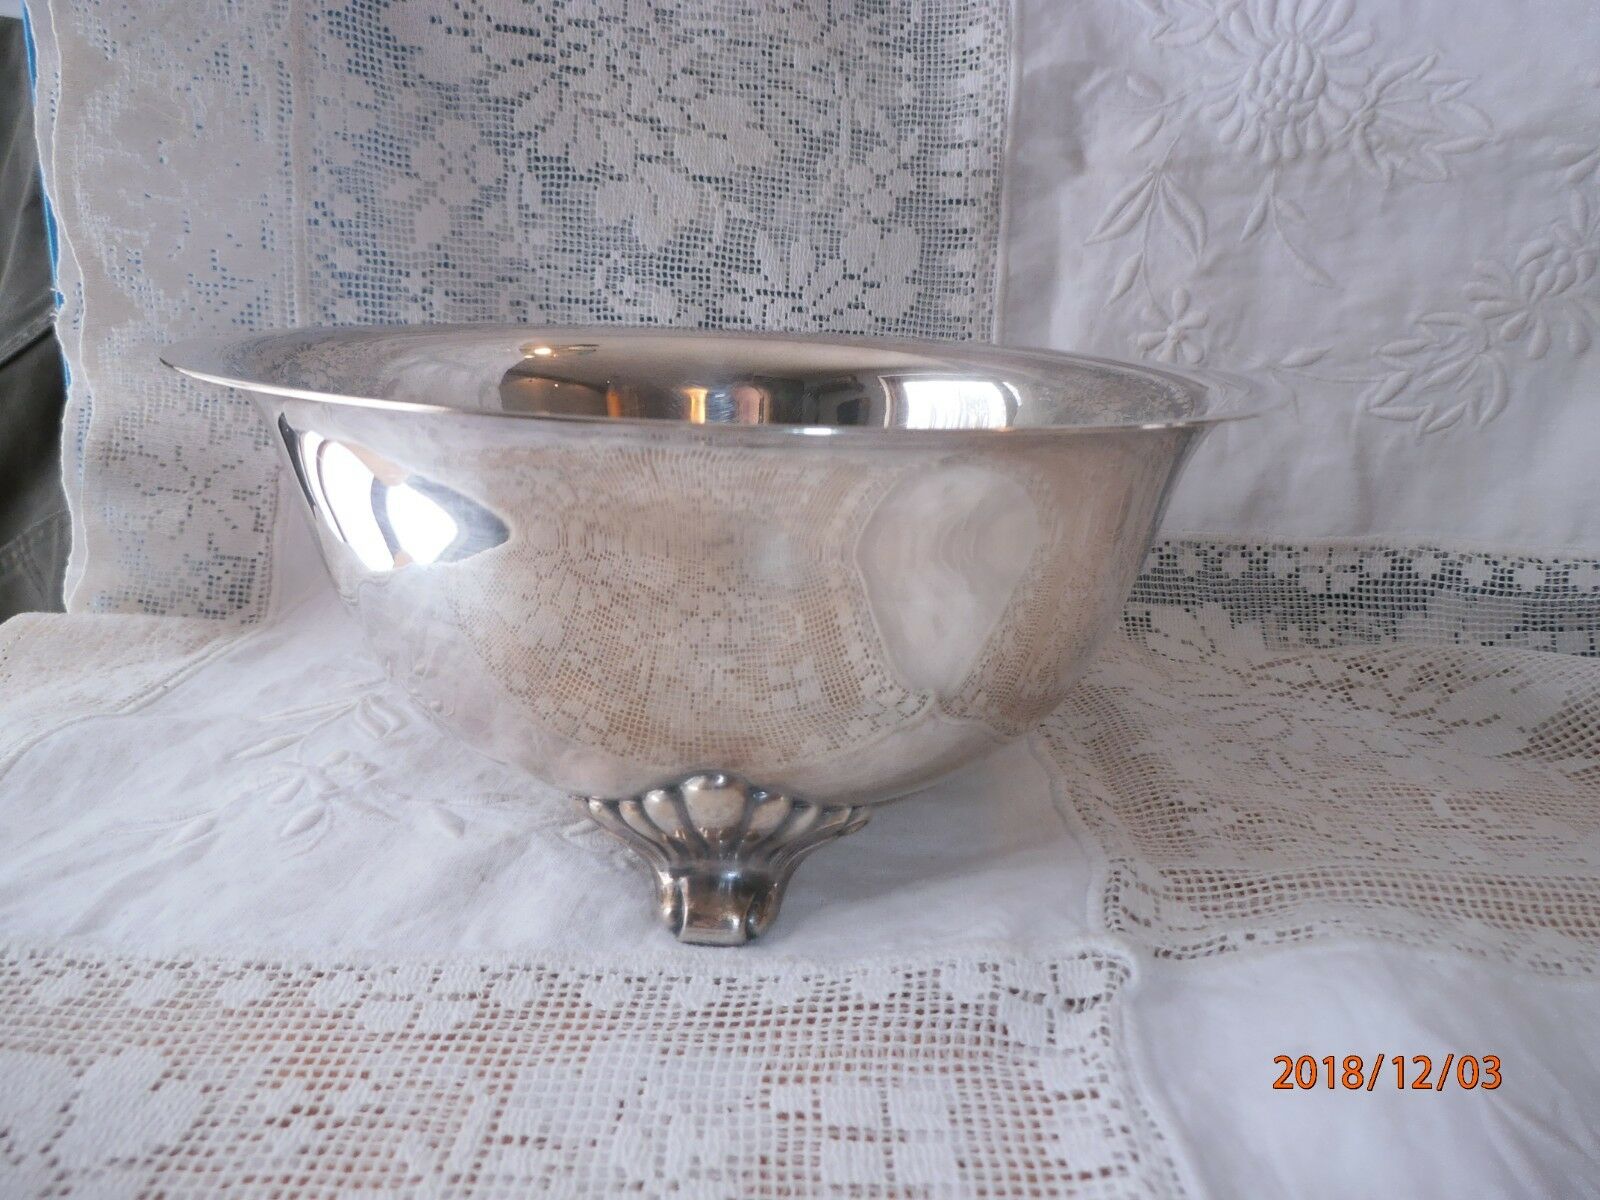 Epca Bristol Silver Poole Serving Bowl 3 Footed Shell Design Silver Plate 8"